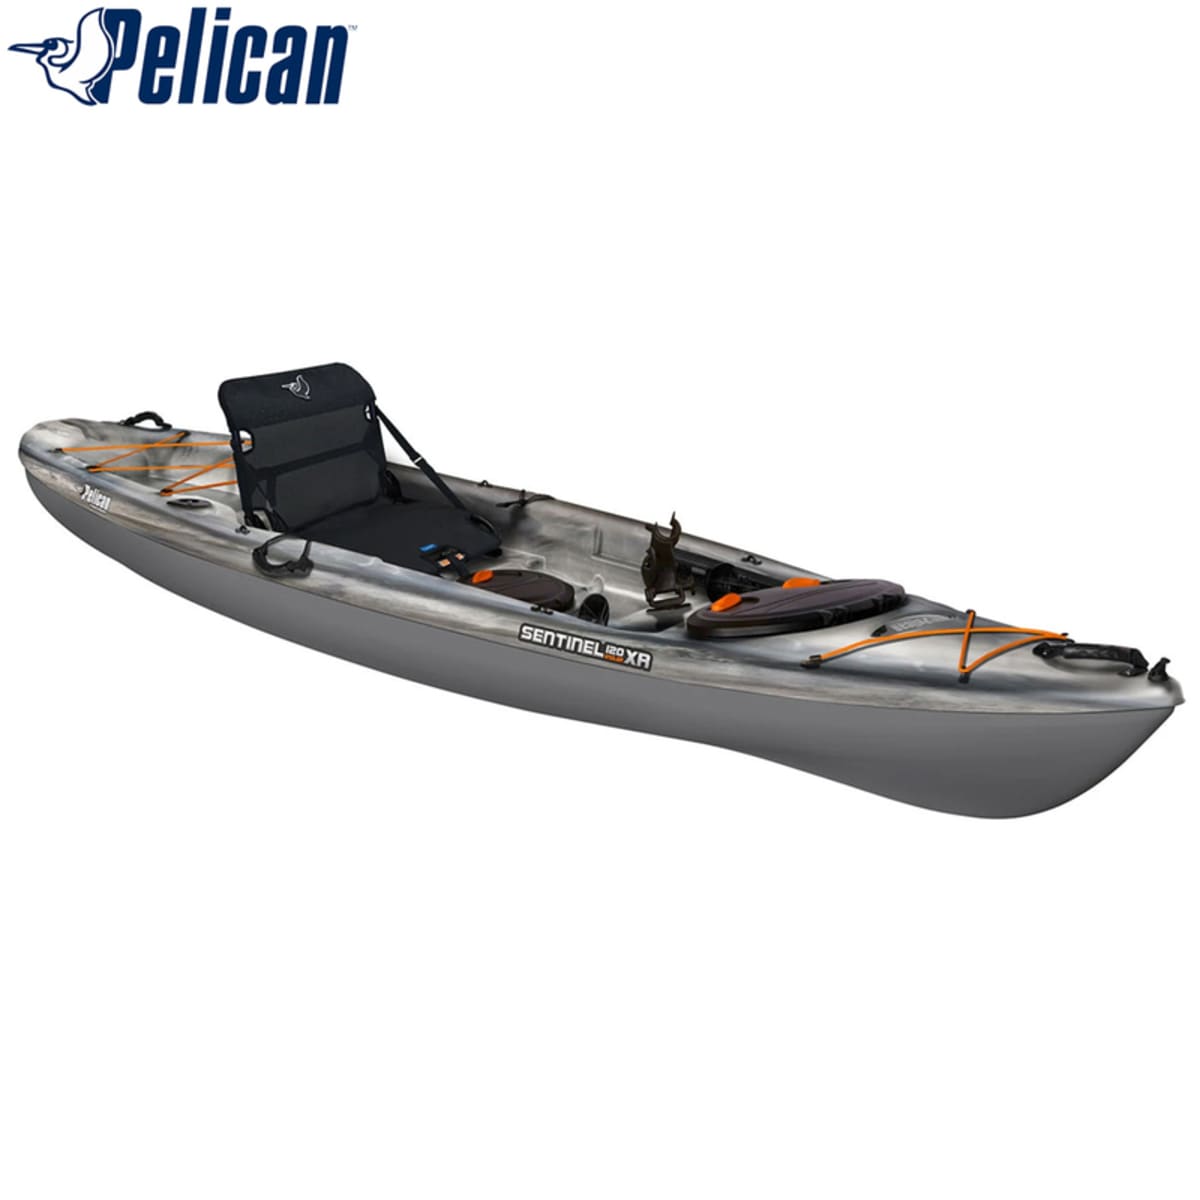 Pelican Catch Classic 100 Kayak Forest Mist/Magnetic Grey, Kayaks